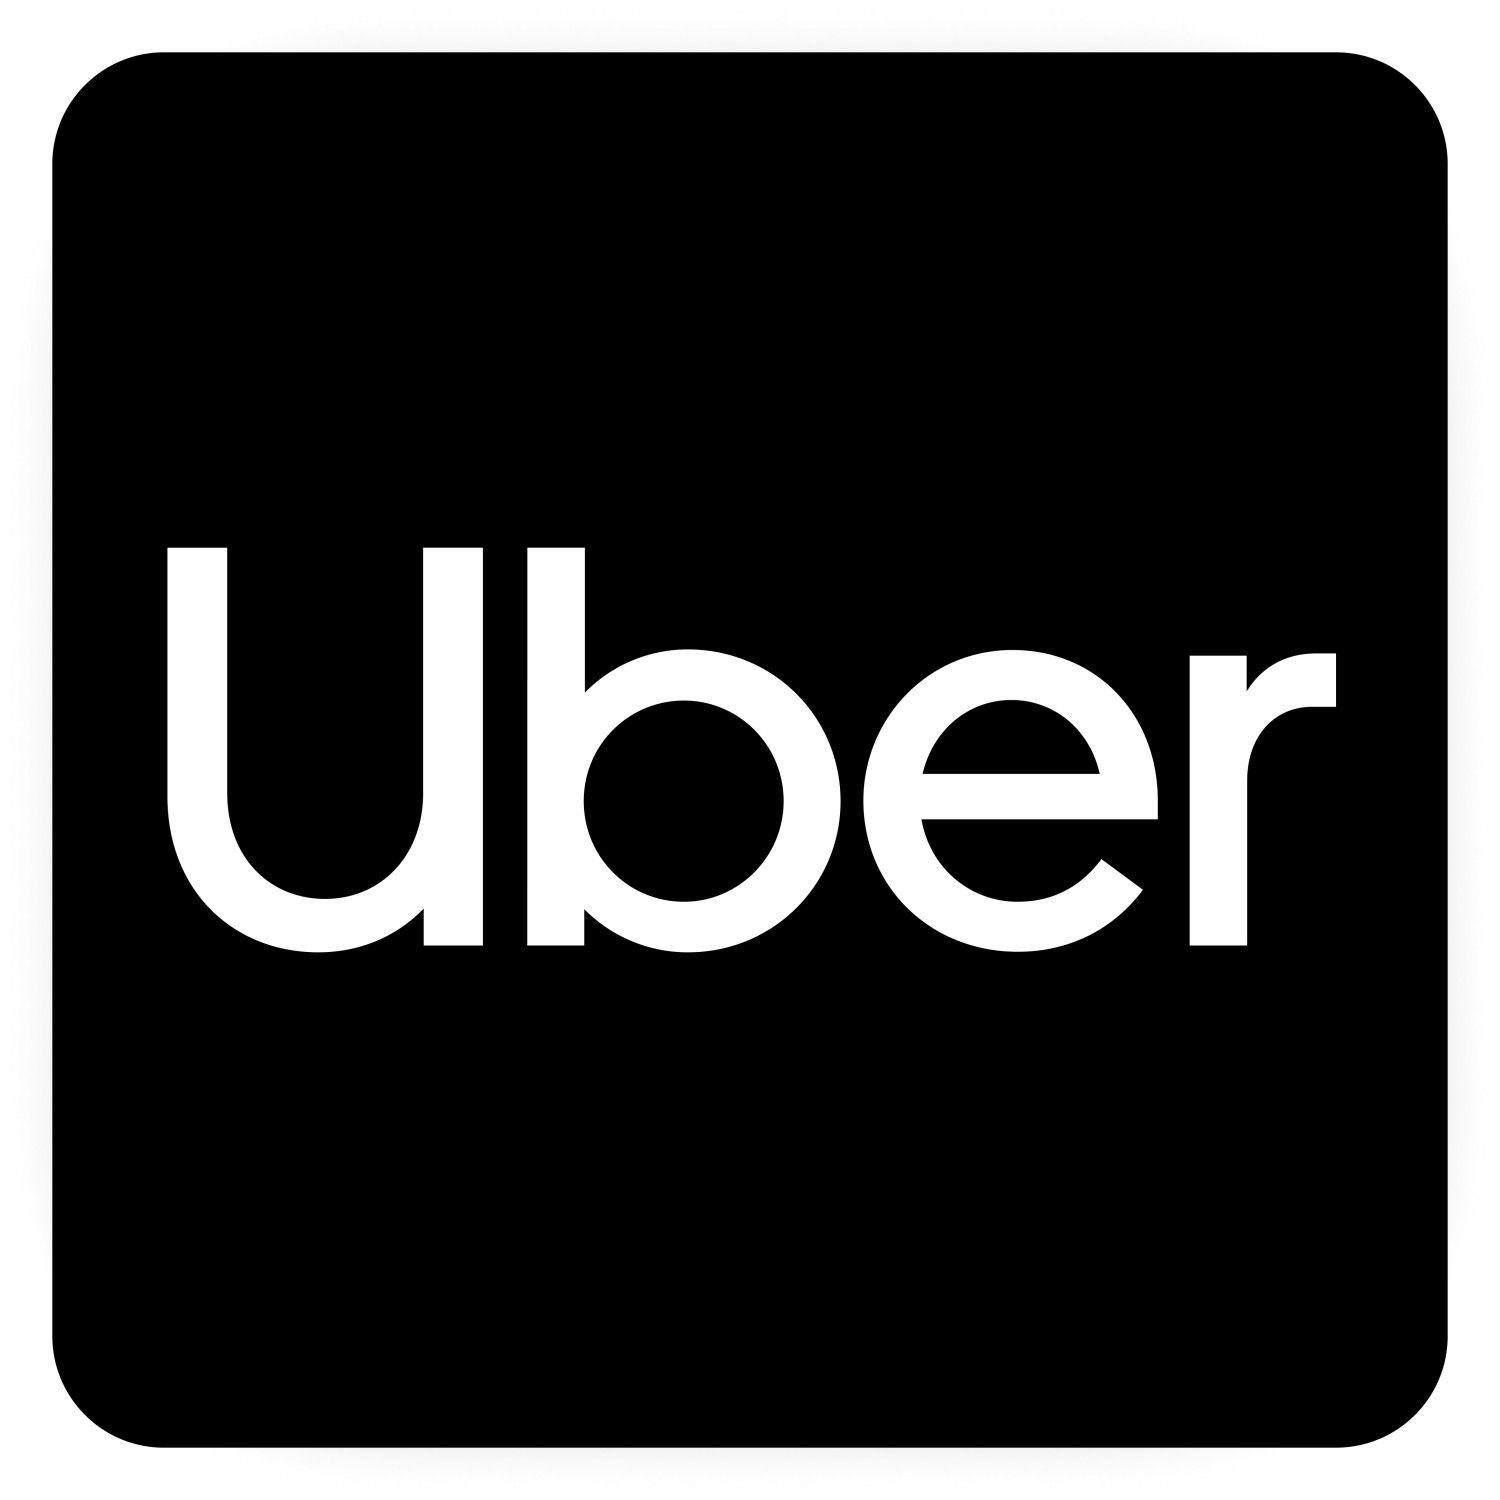 App Logo - Uber is getting a new look